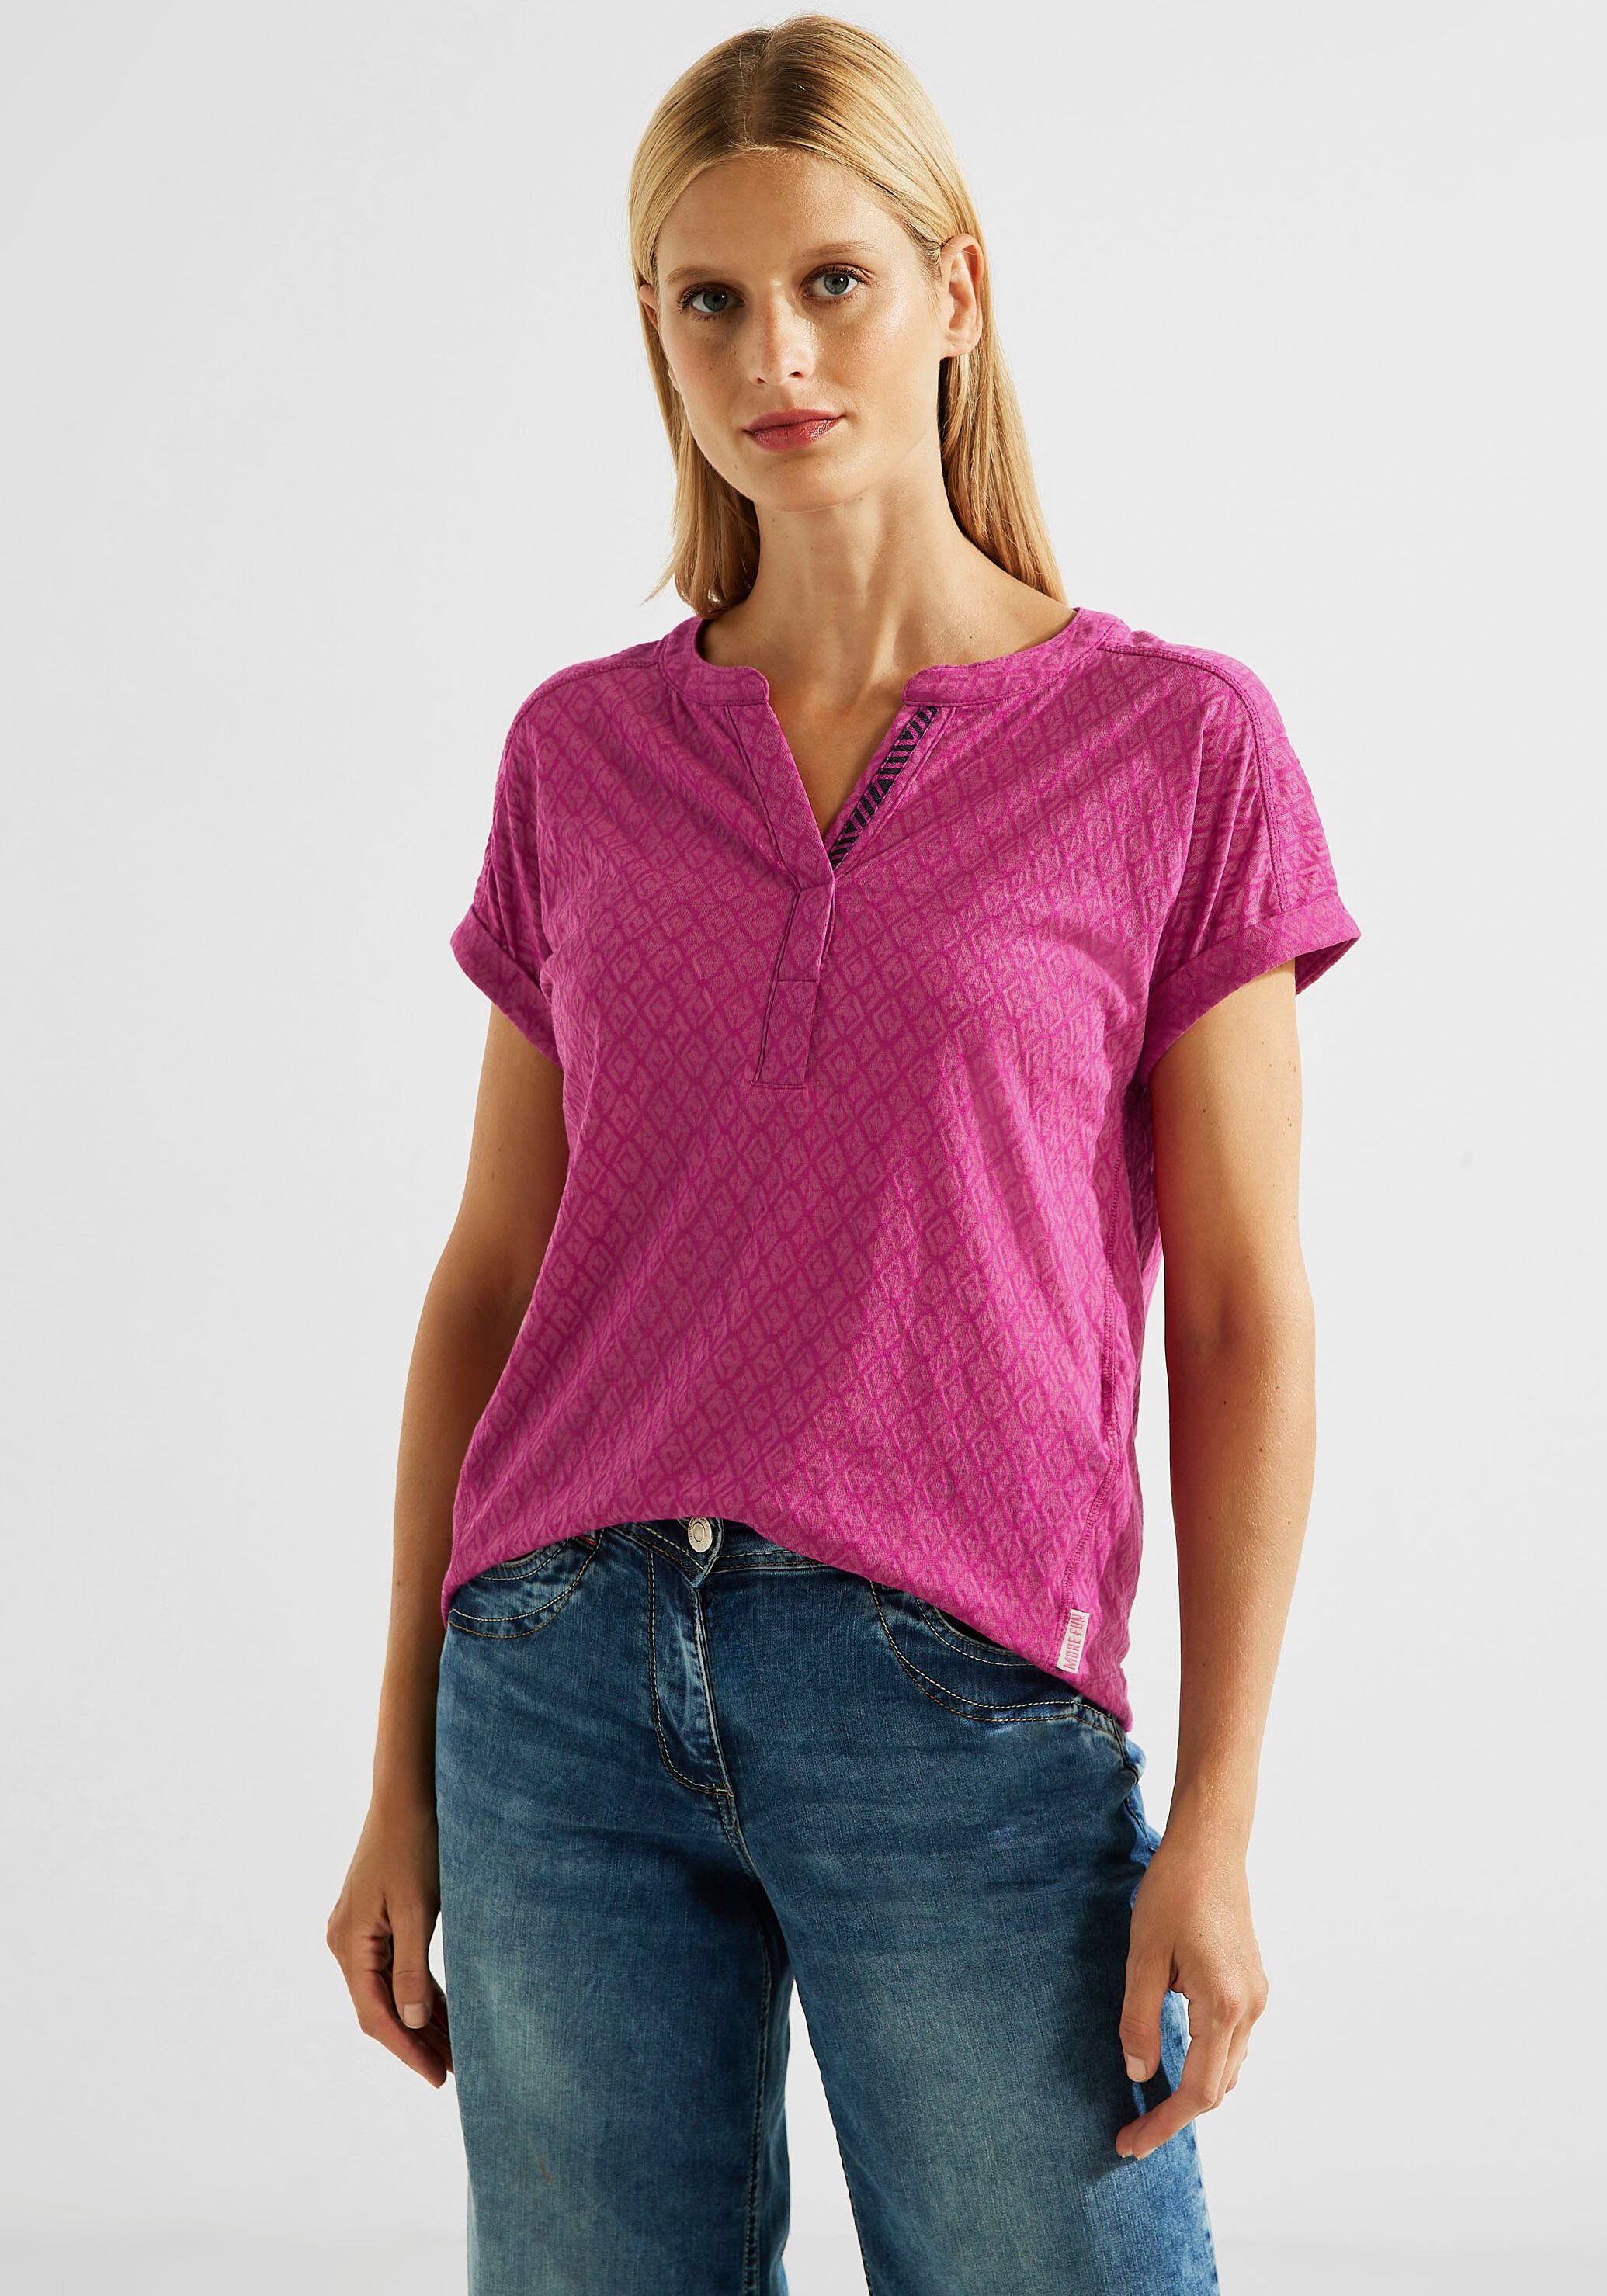 Cecil T-Shirt mit Allover-Muster in Rhombusform cool pink